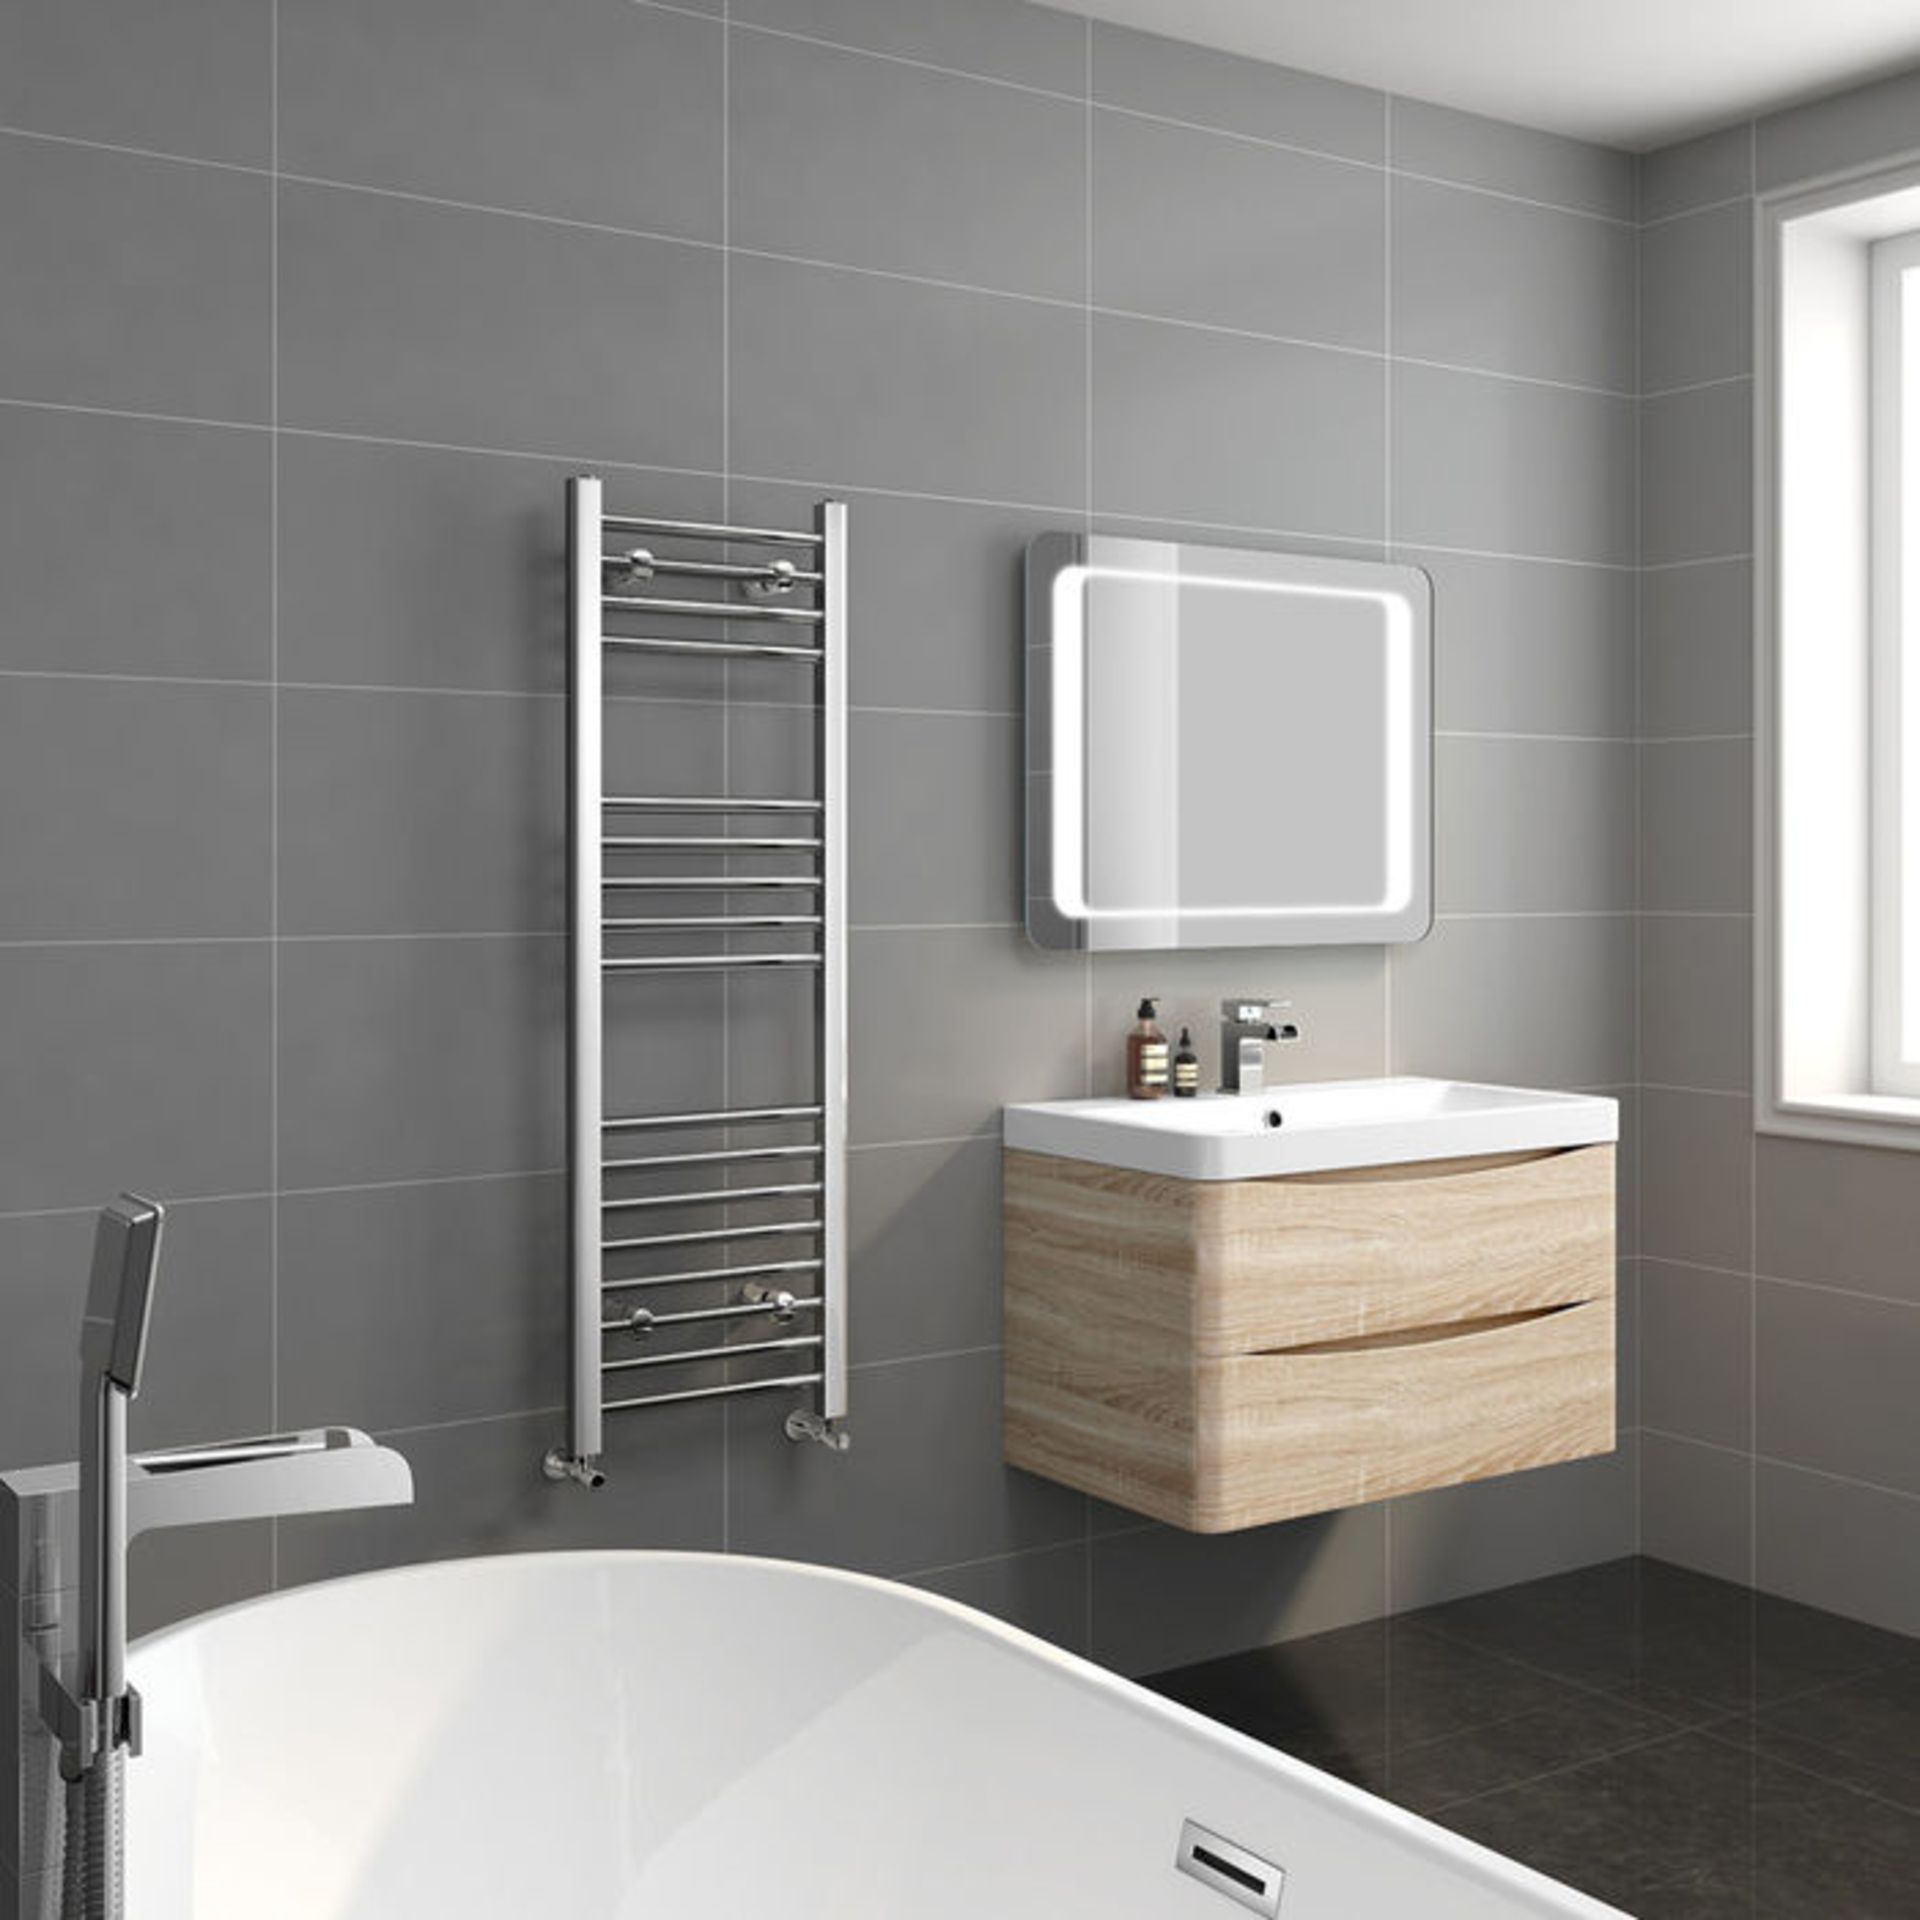 (E40) 1200x400mm - 20mm Tubes - Chrome Heated Straight Rail Ladder Towel Radiator. Low carbon - Image 2 of 3